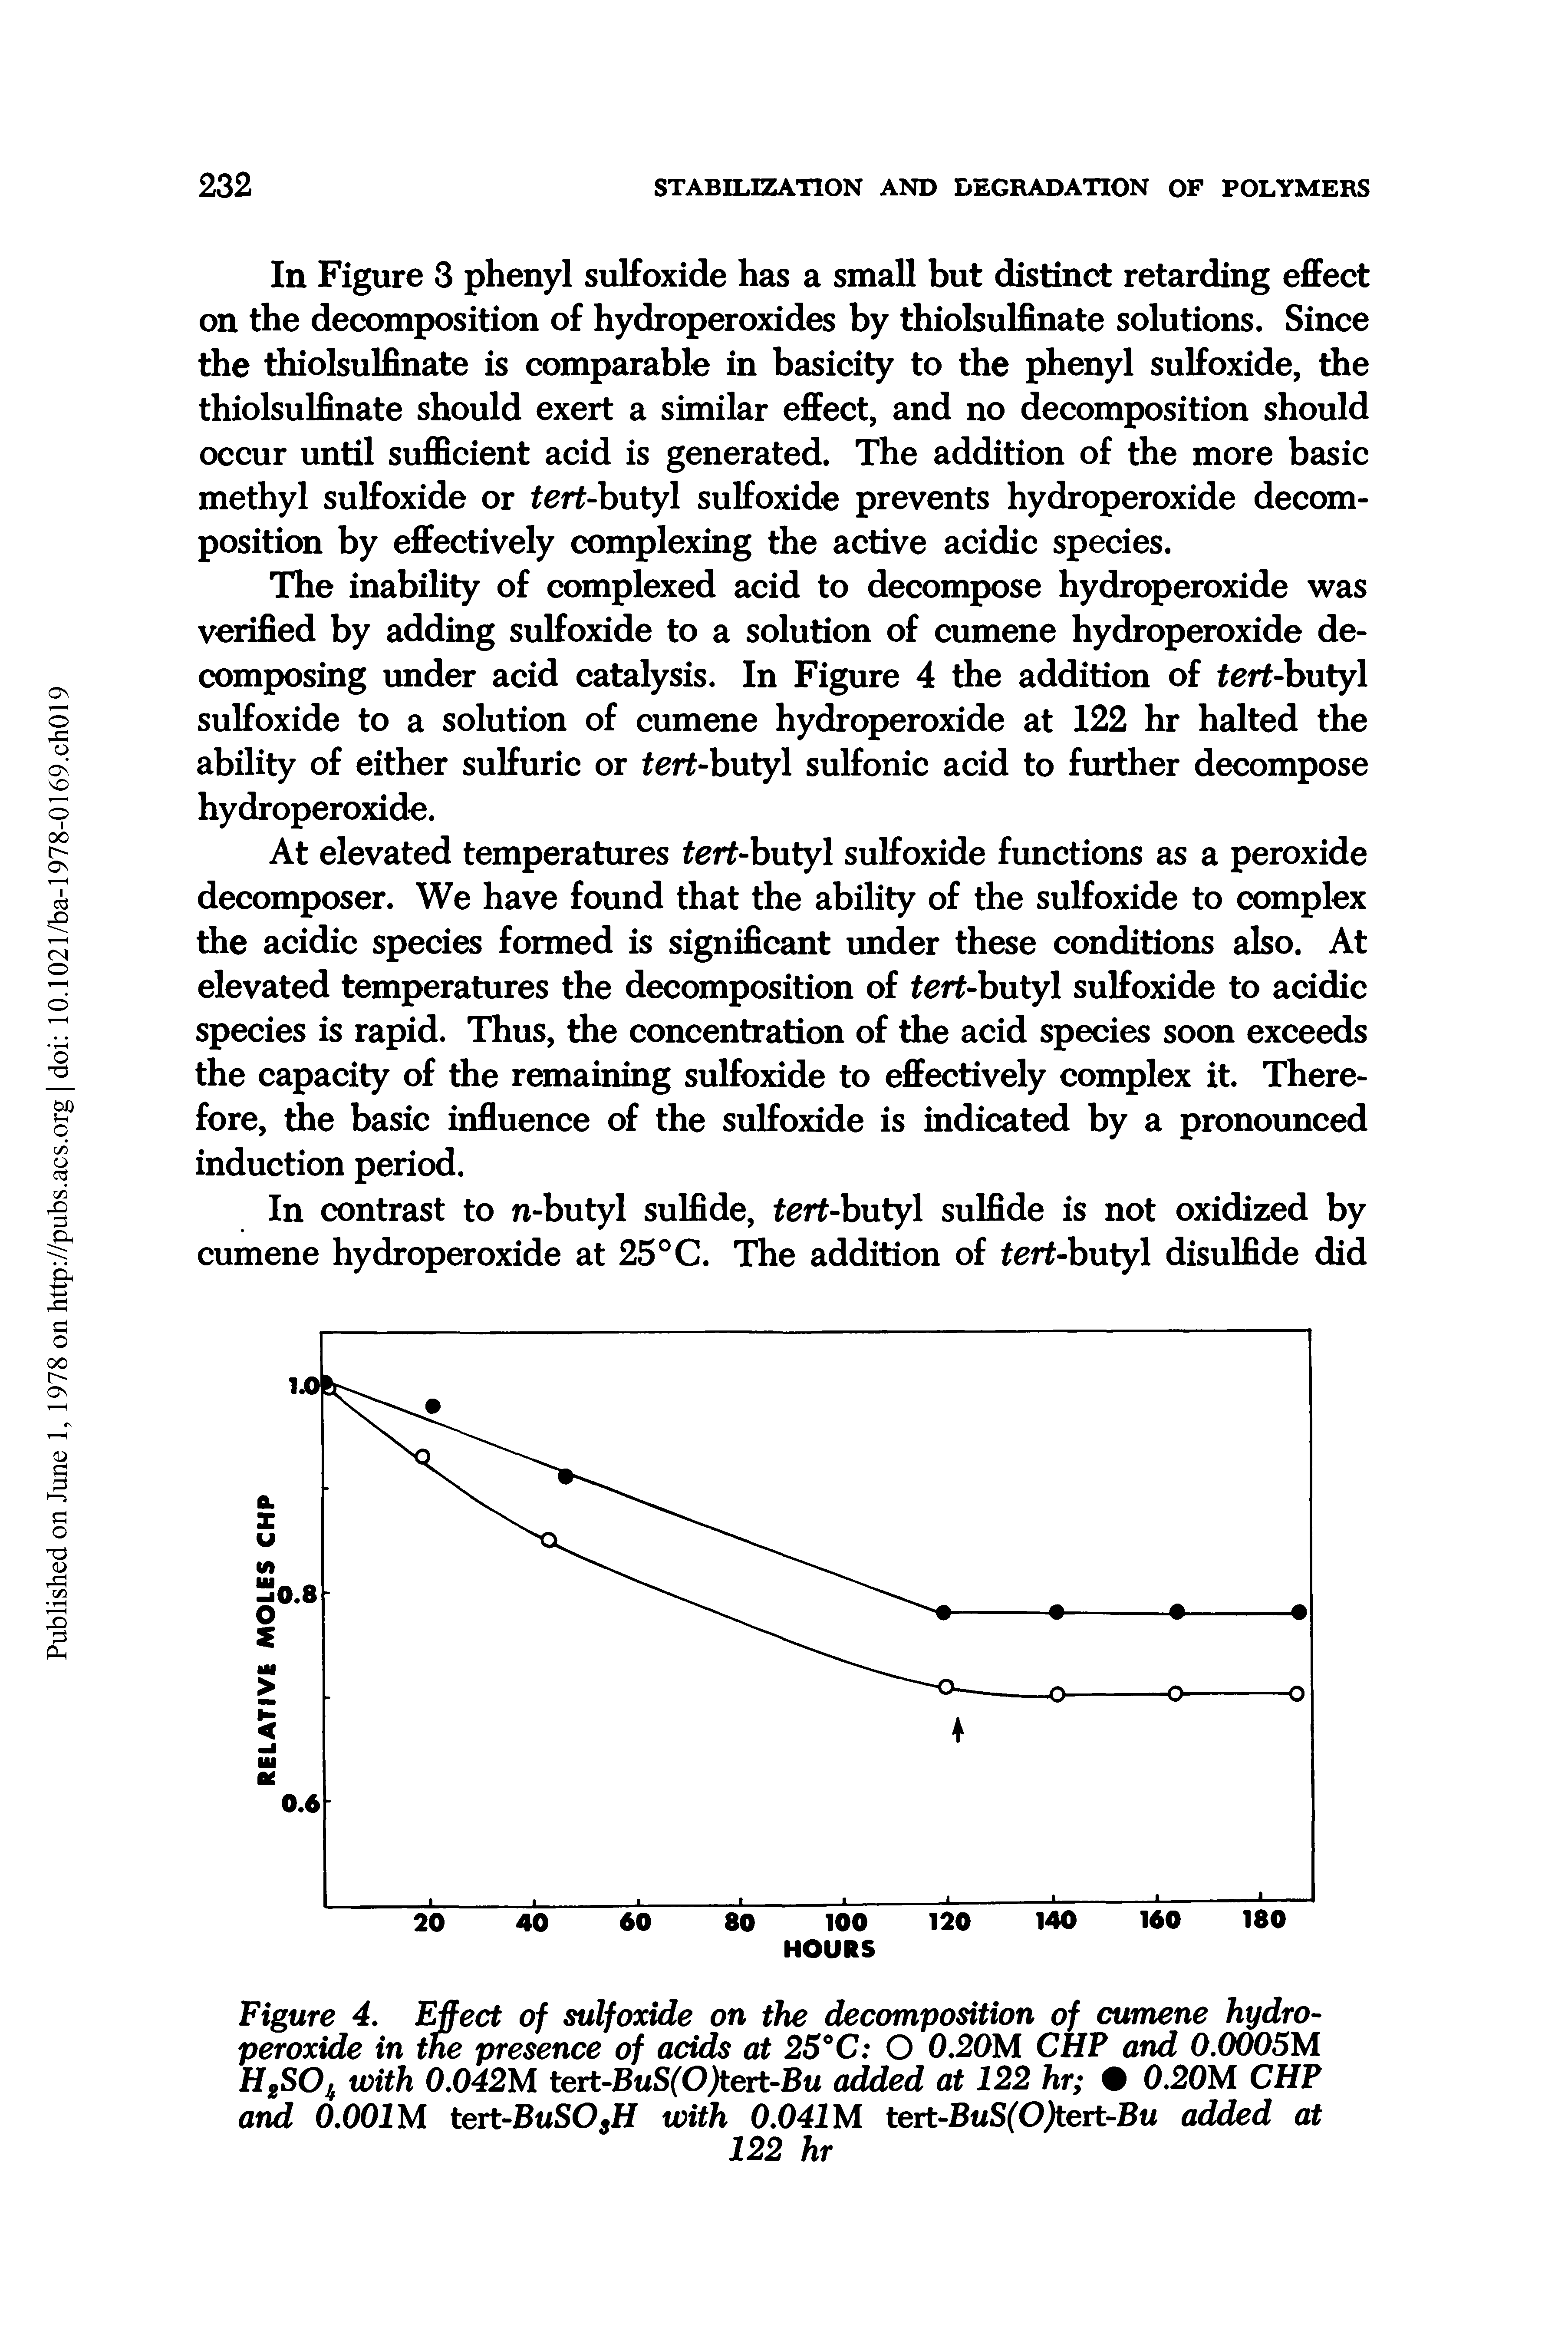 Figure 4. Effect of sulfoxide on the decomposition of cumene hydroperoxide in the presence of adds at 25°C O 0.20M CHF and 0.0005M H2SOh with 0.042M tert-BuS(0)tert-Bu added at 122 hr 0.20M CHP and 0.001 M tert-BuSOsH with 0.041M tert-BuS(0)tert-Bu added at...